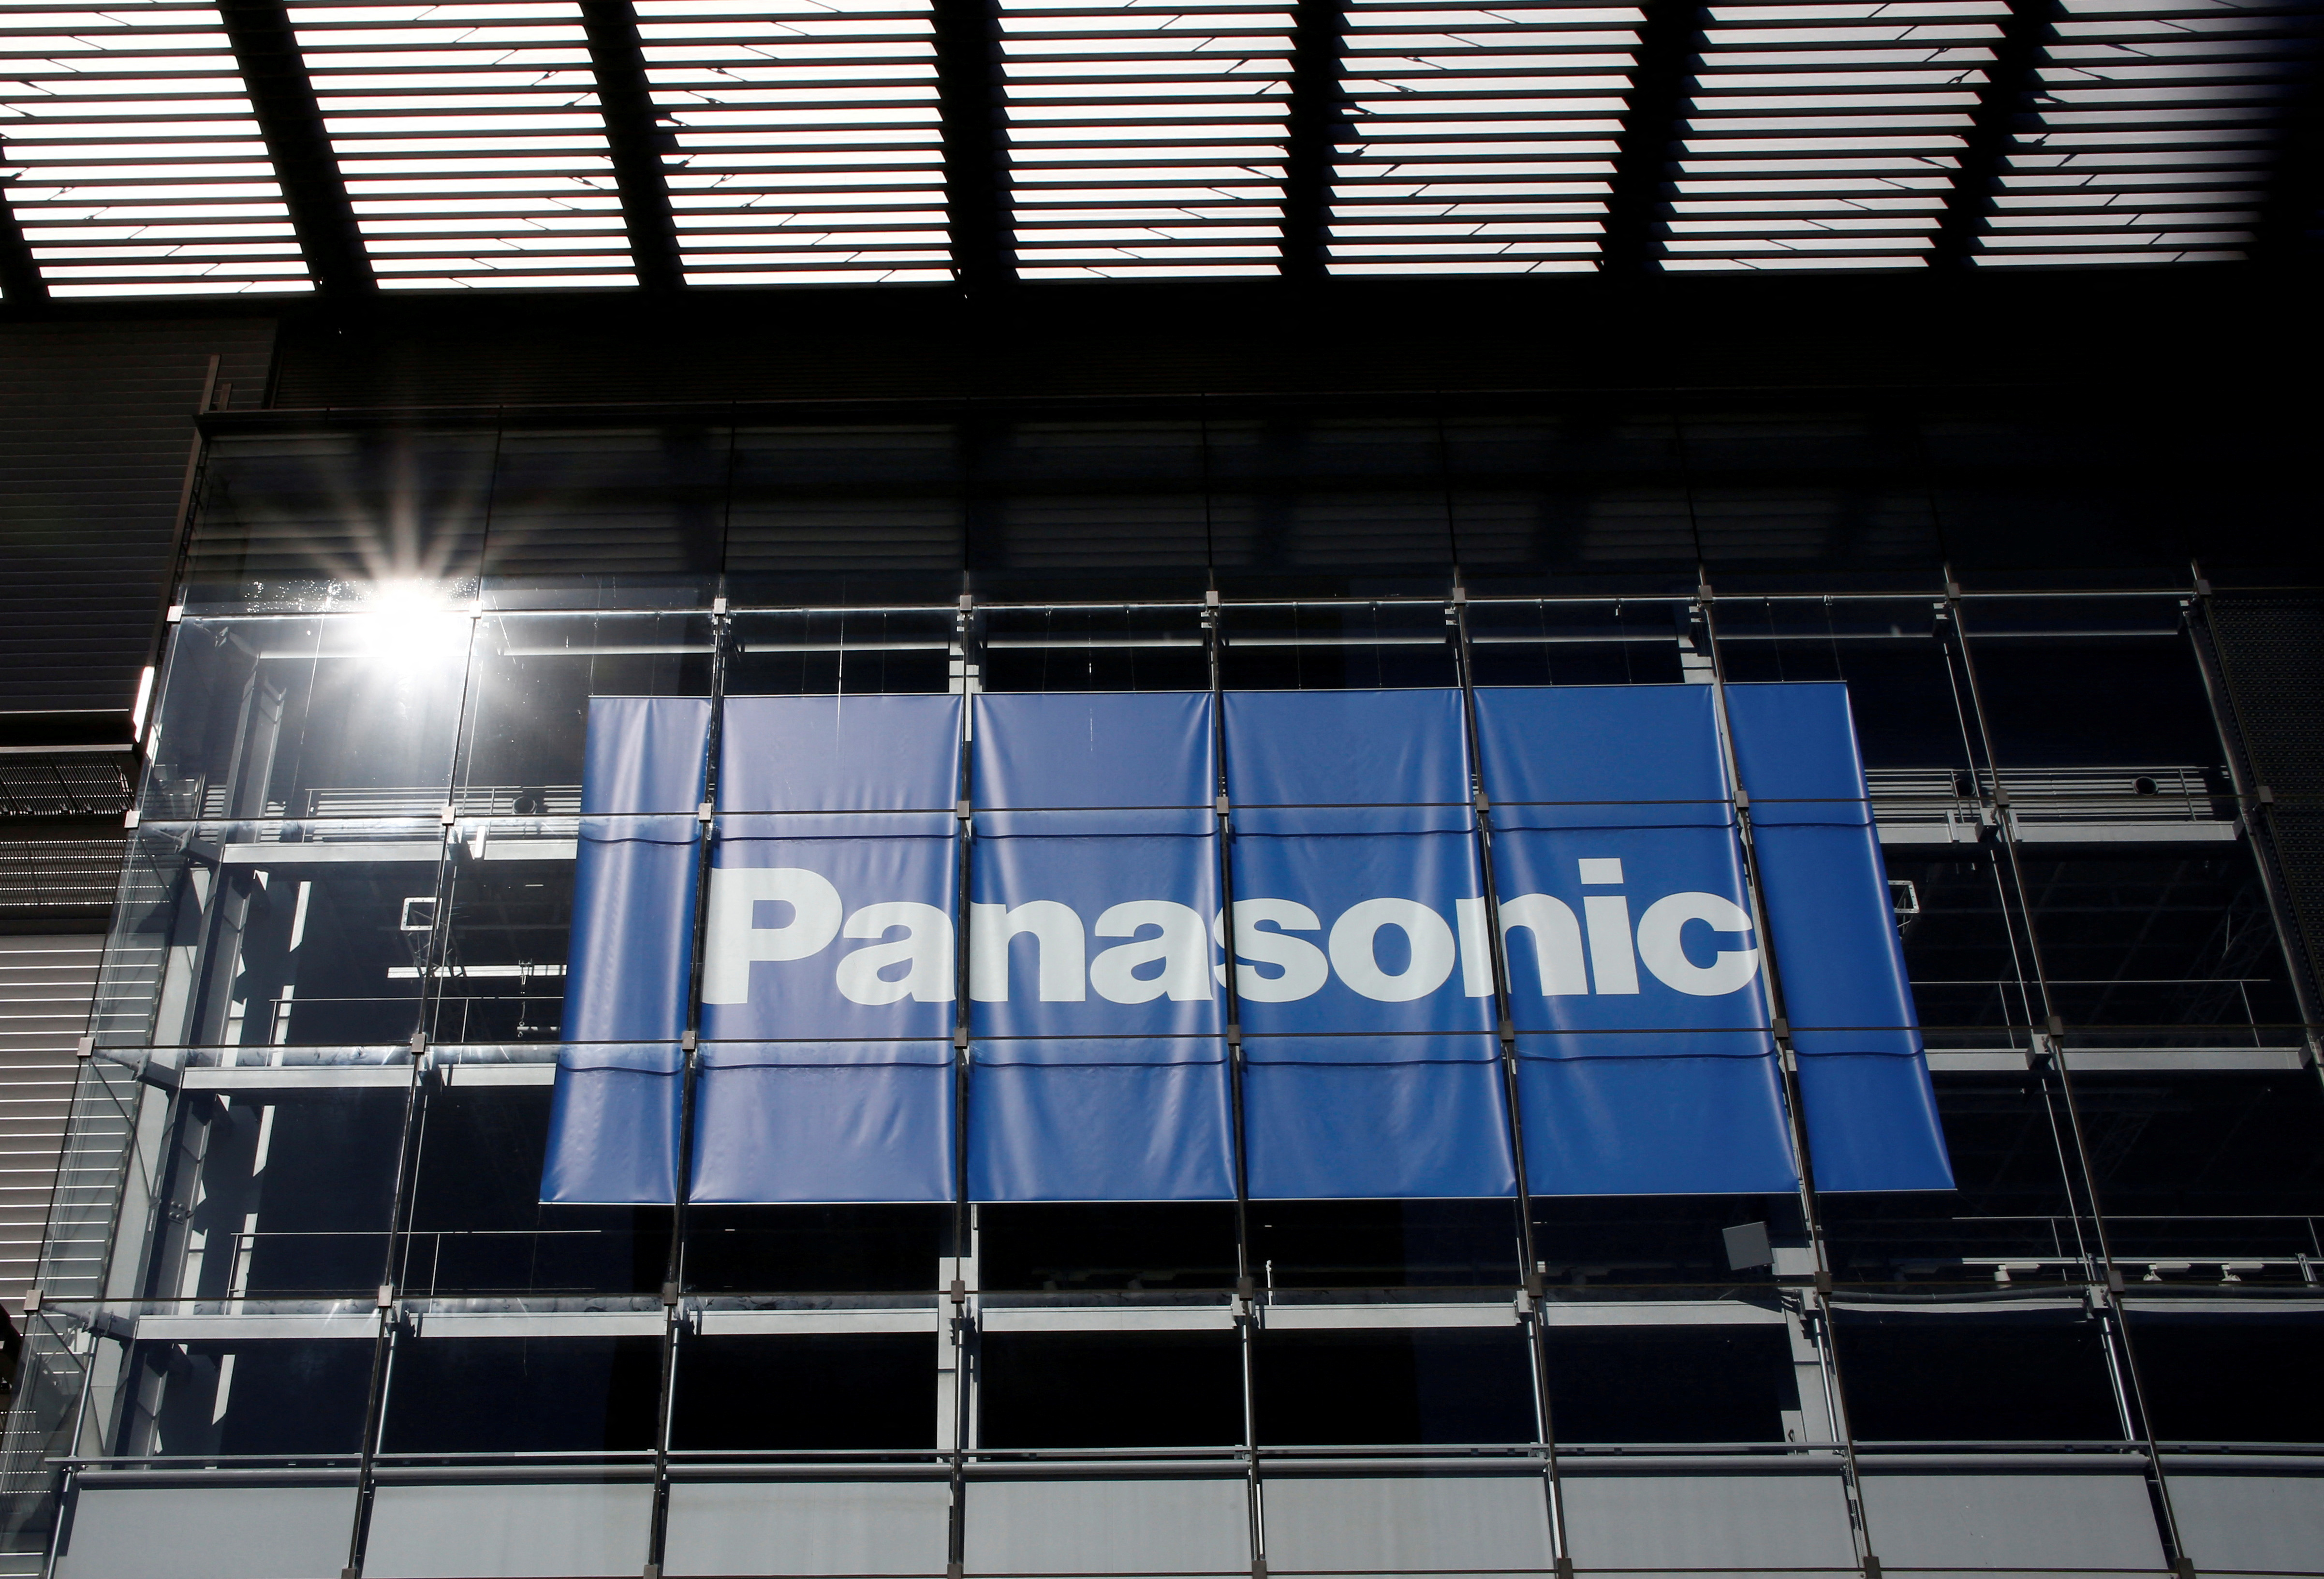 Panasonic Corp's logo is pictured at Panasonic Center in Tokyo